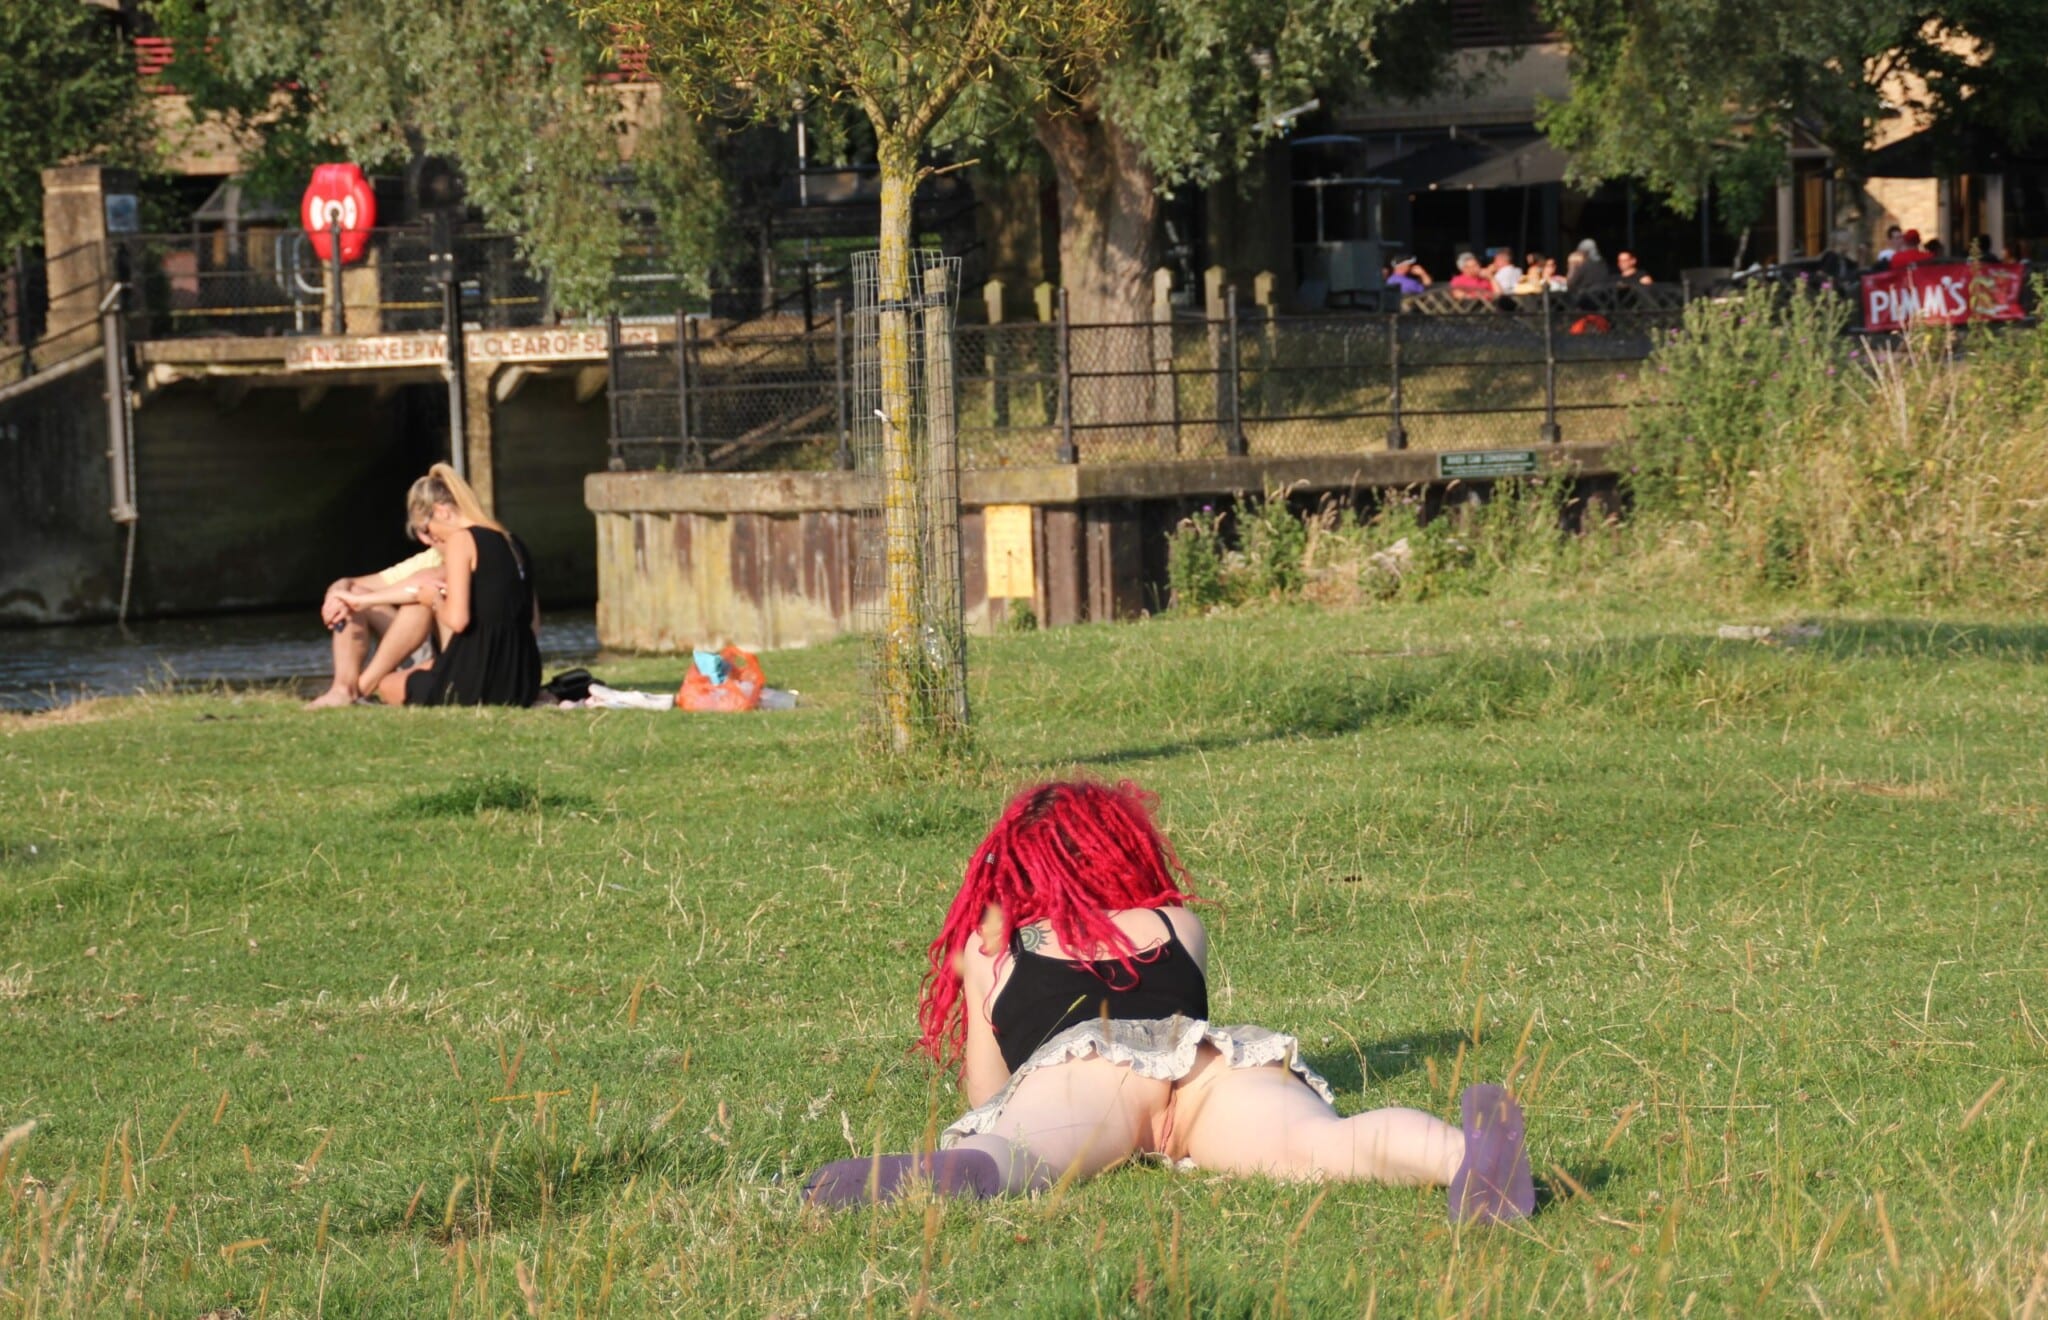 Laying knickerless in a public park easy access for horny strangers voyeur real nudity public flashing no panties